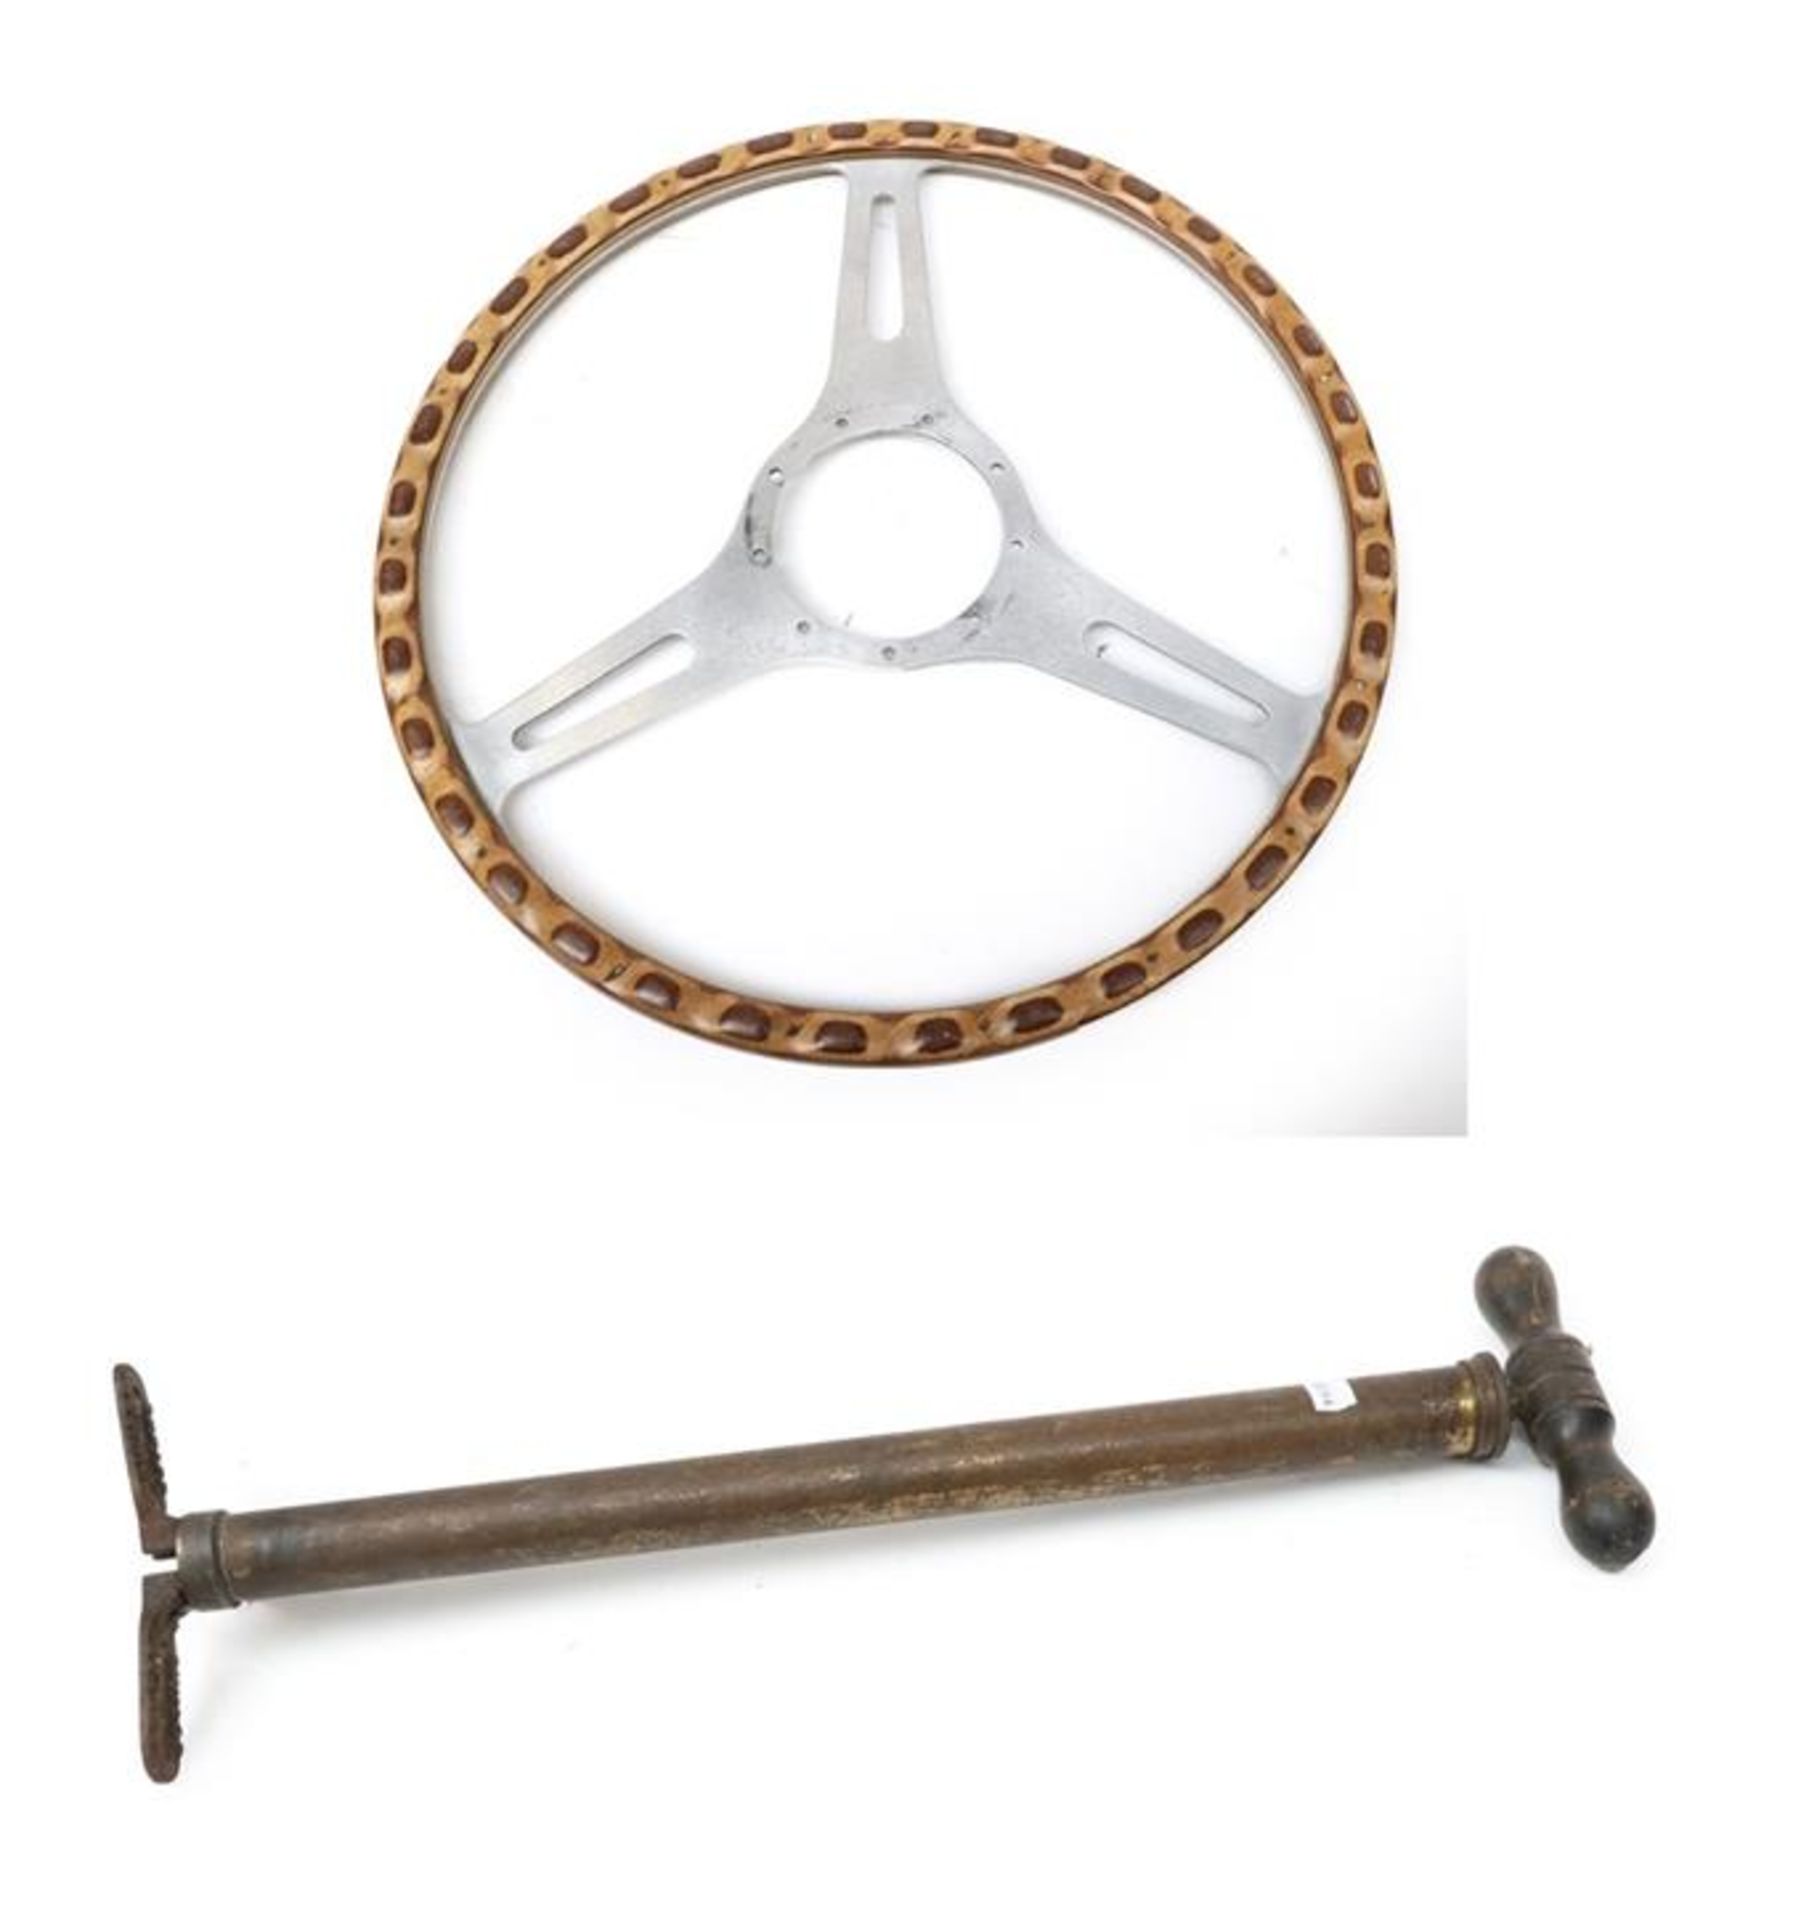 A 1950/60 Wood Rim and Rivetted Three-Spoke Steering Wheel, 40cm diameter; and An Early 20th Century